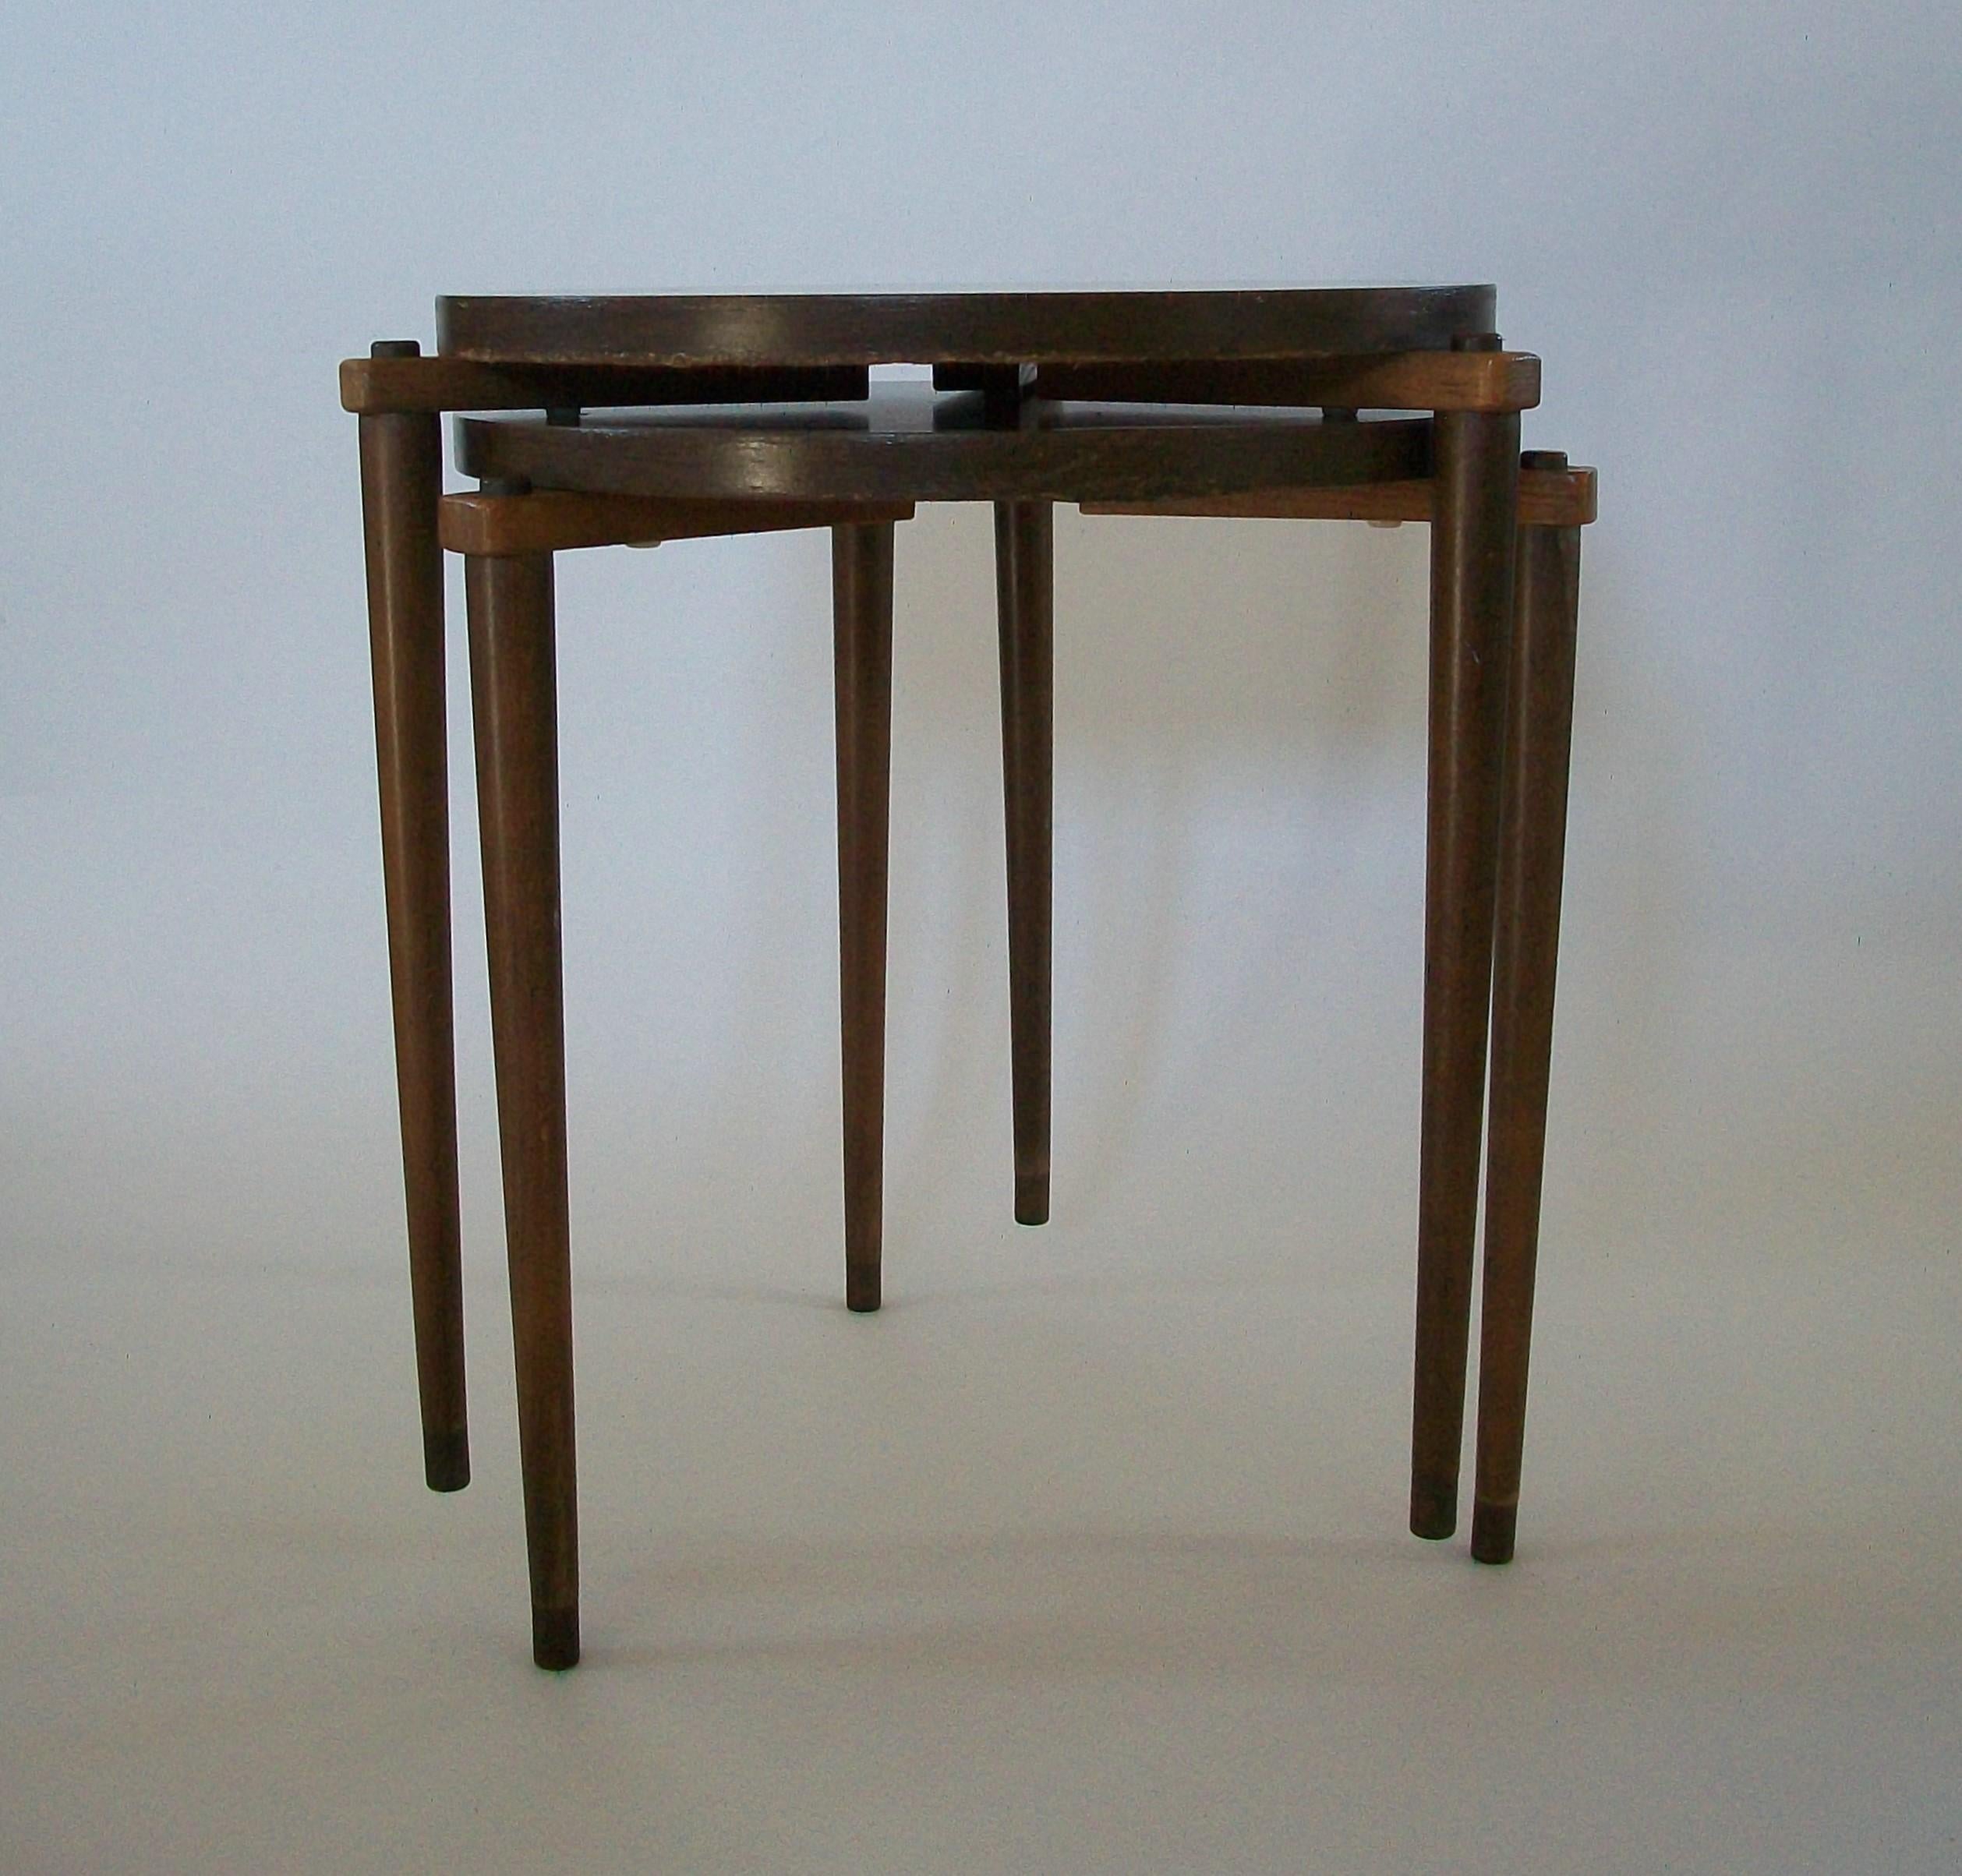 Brass Vintage Pair of Fornasetti Style Stacking Occasional Tables - U.S. - Mid 20th C.